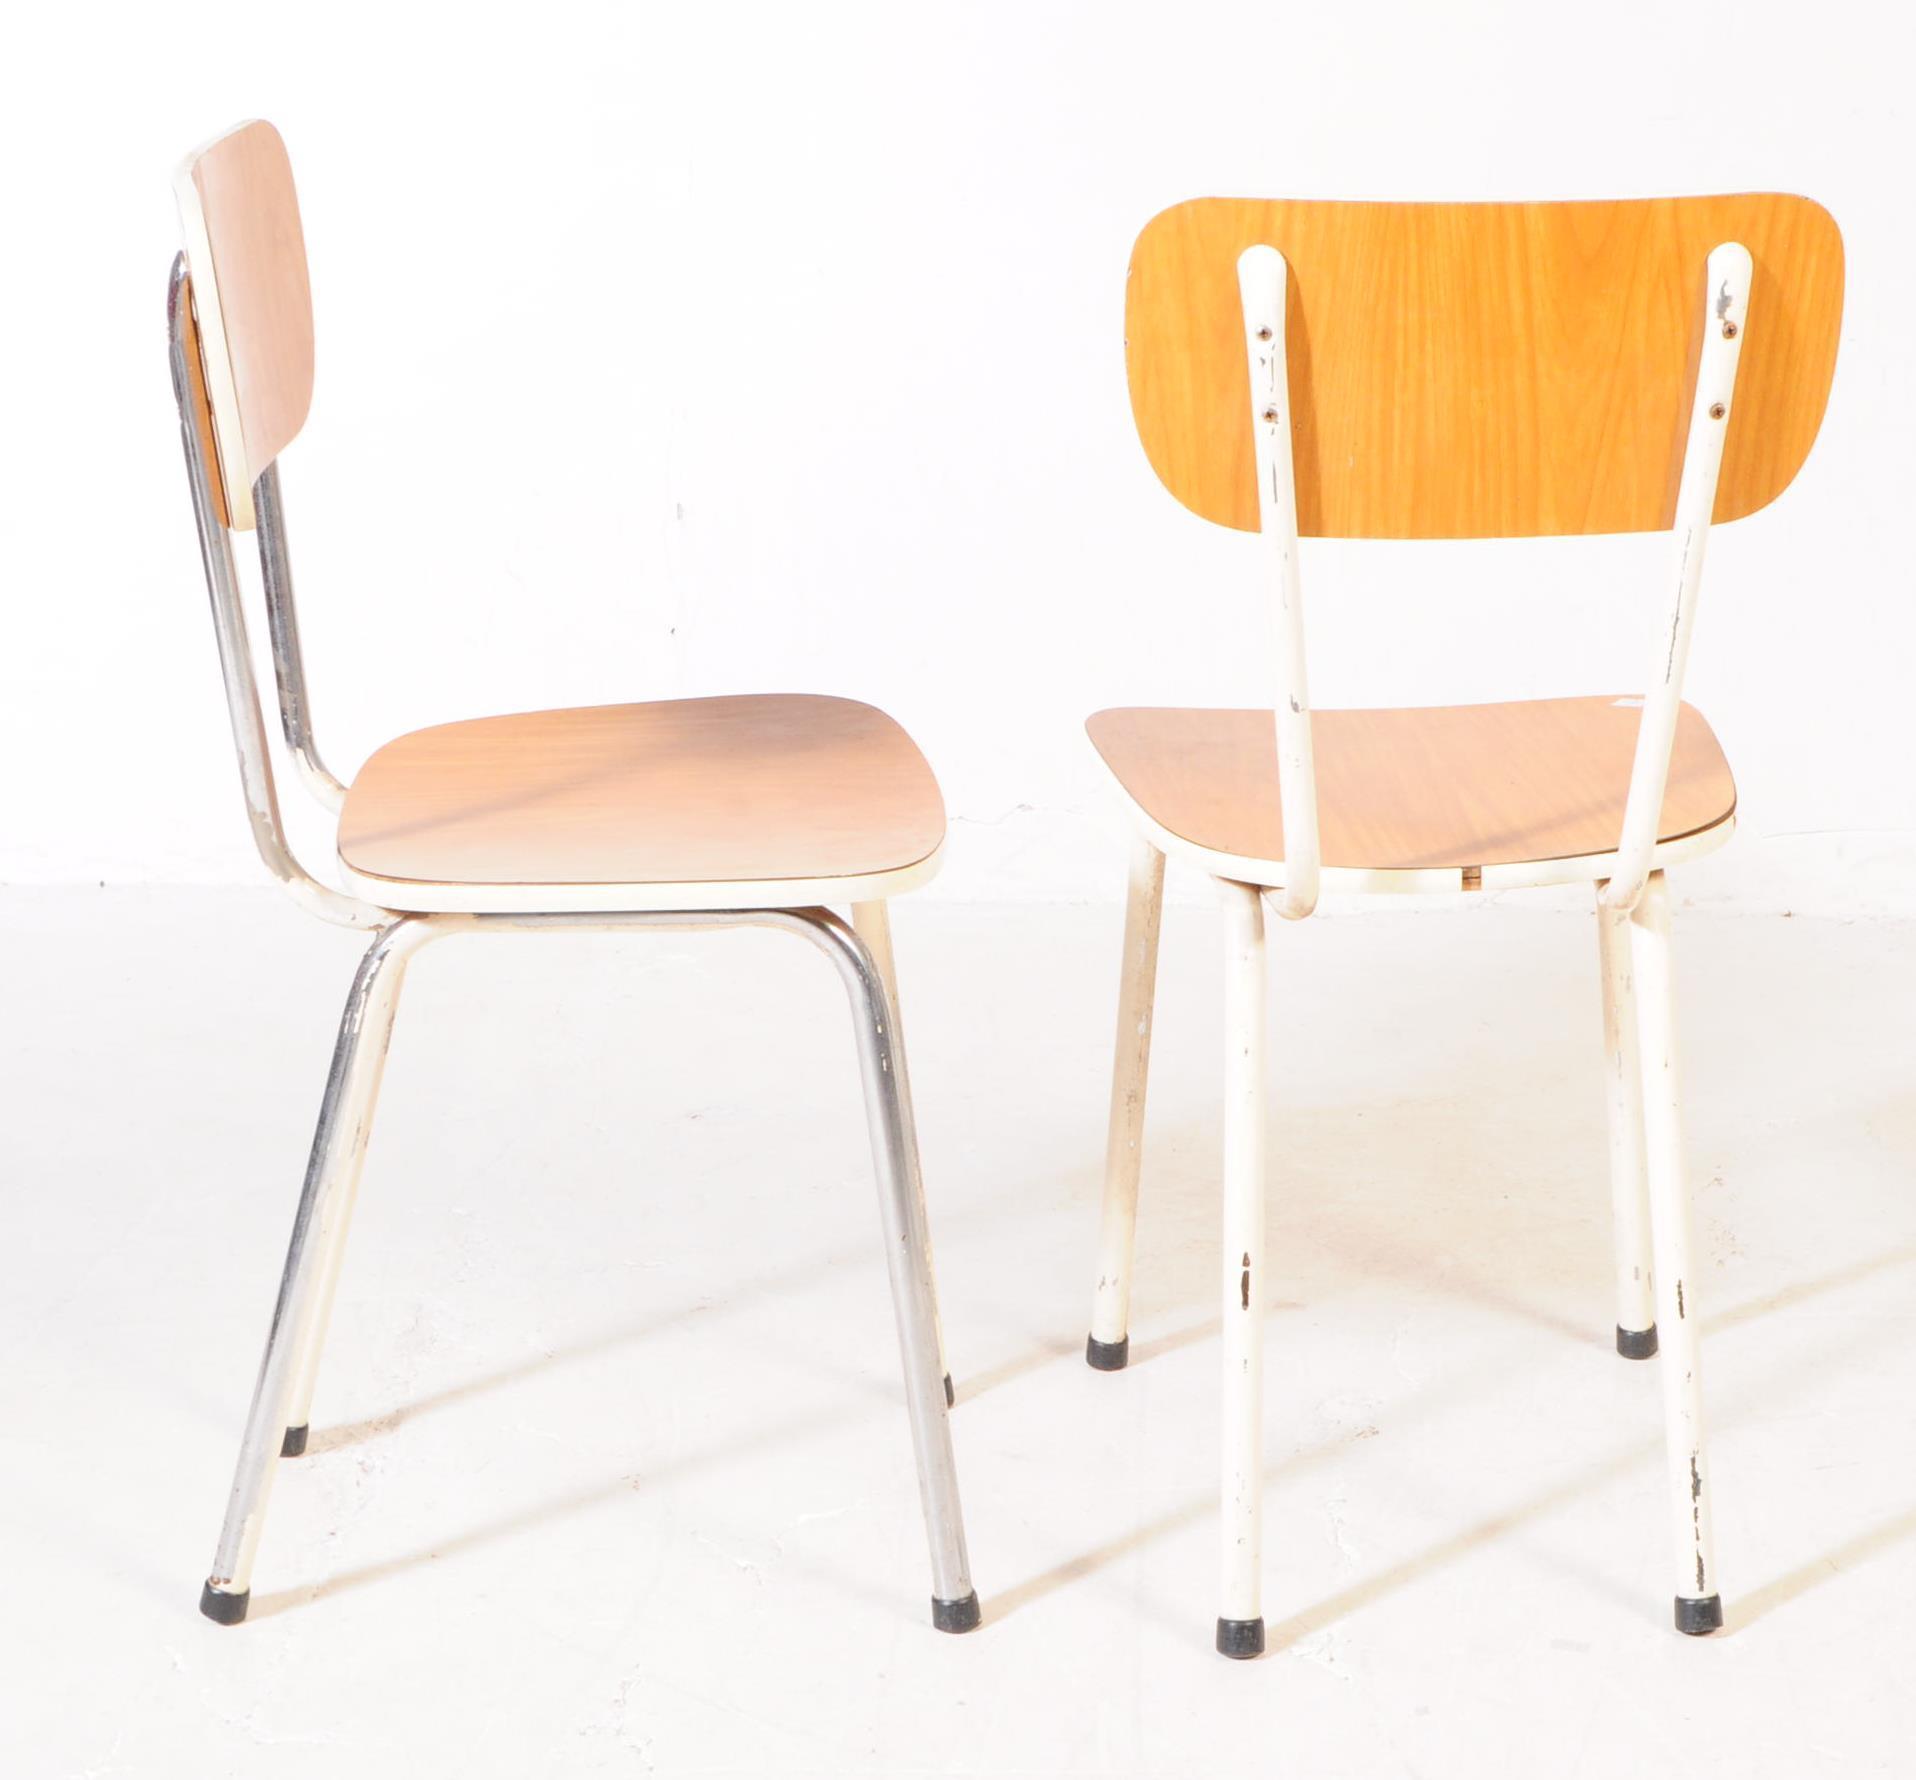 SET OF FOUR RETRO 20TH CENTURY KITCHEN CHAIRS - Image 3 of 3